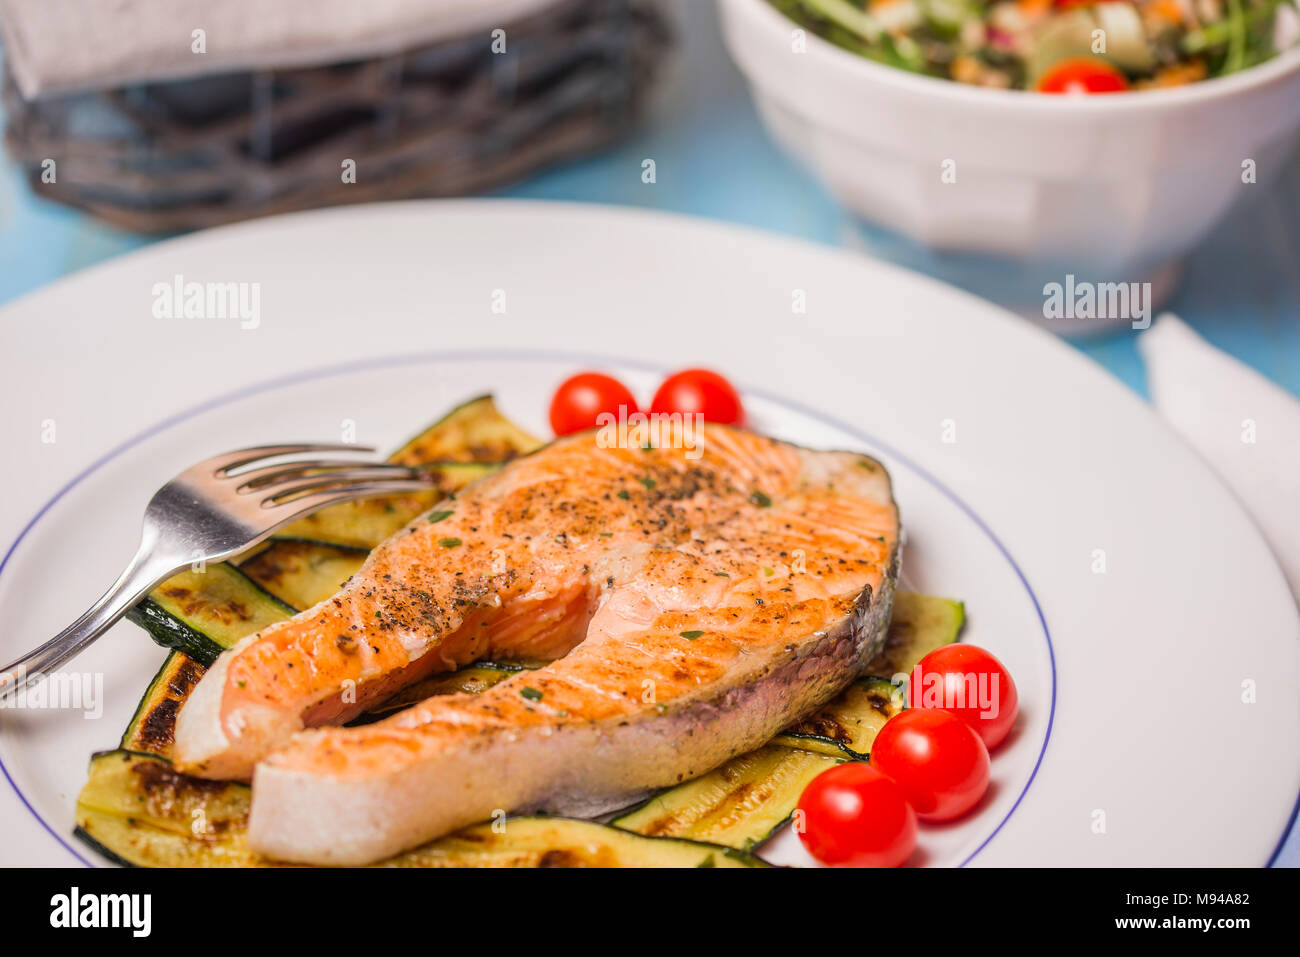 Roasted salmon and green zucchini with vvegetables salad in background Stock Photo